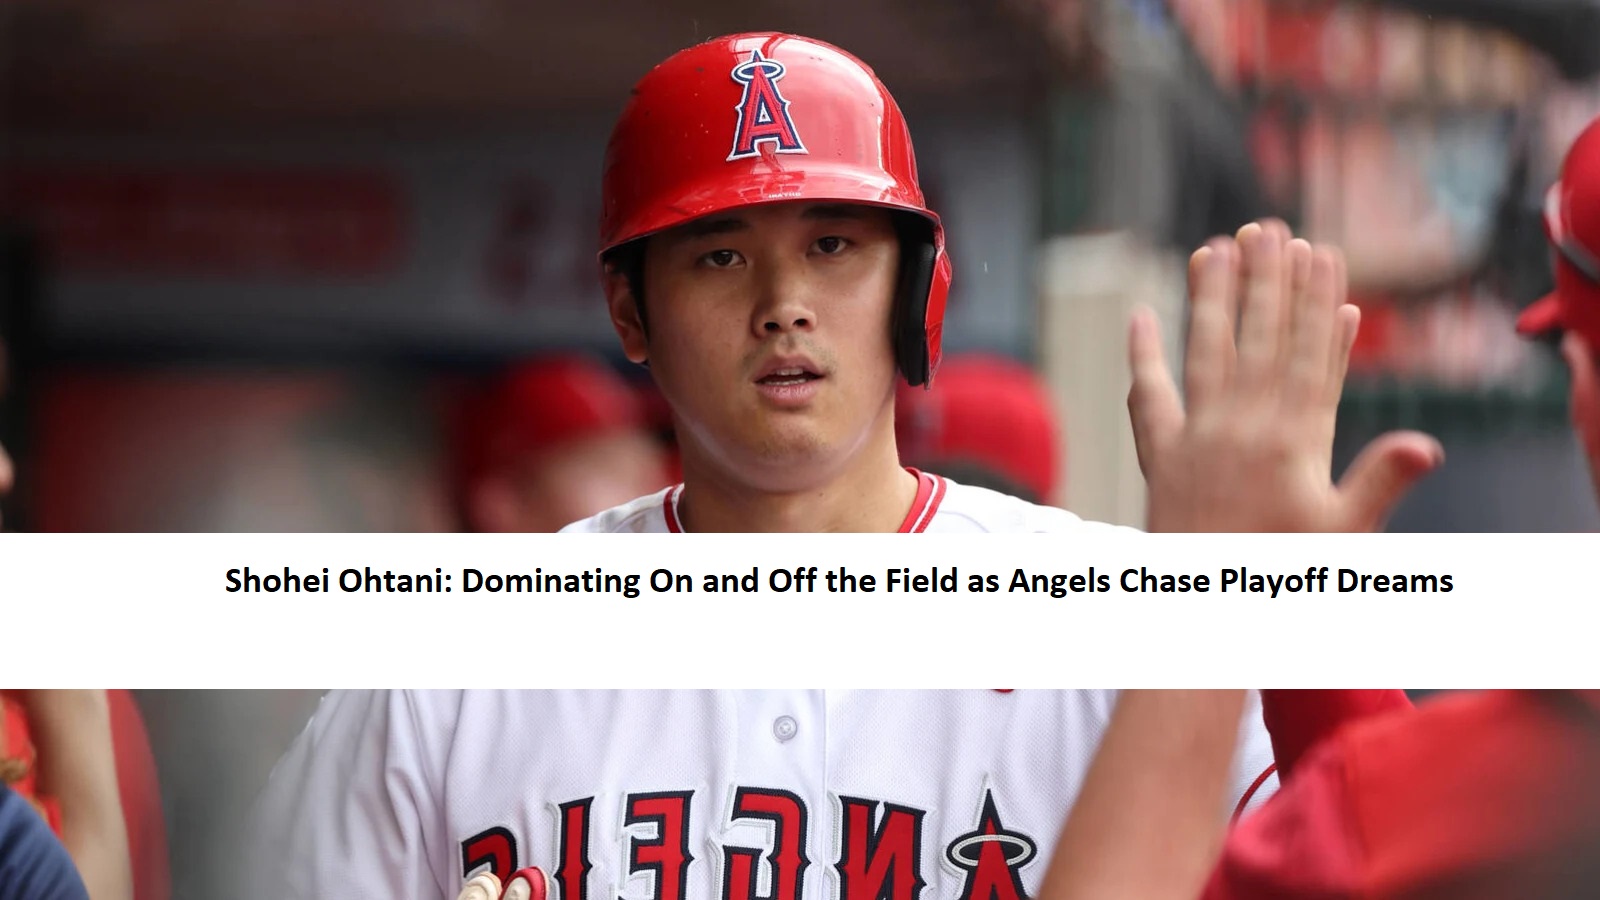 Shohei Ohtani: Dominating On and Off the Field as Angels Chase Playoff Dreams